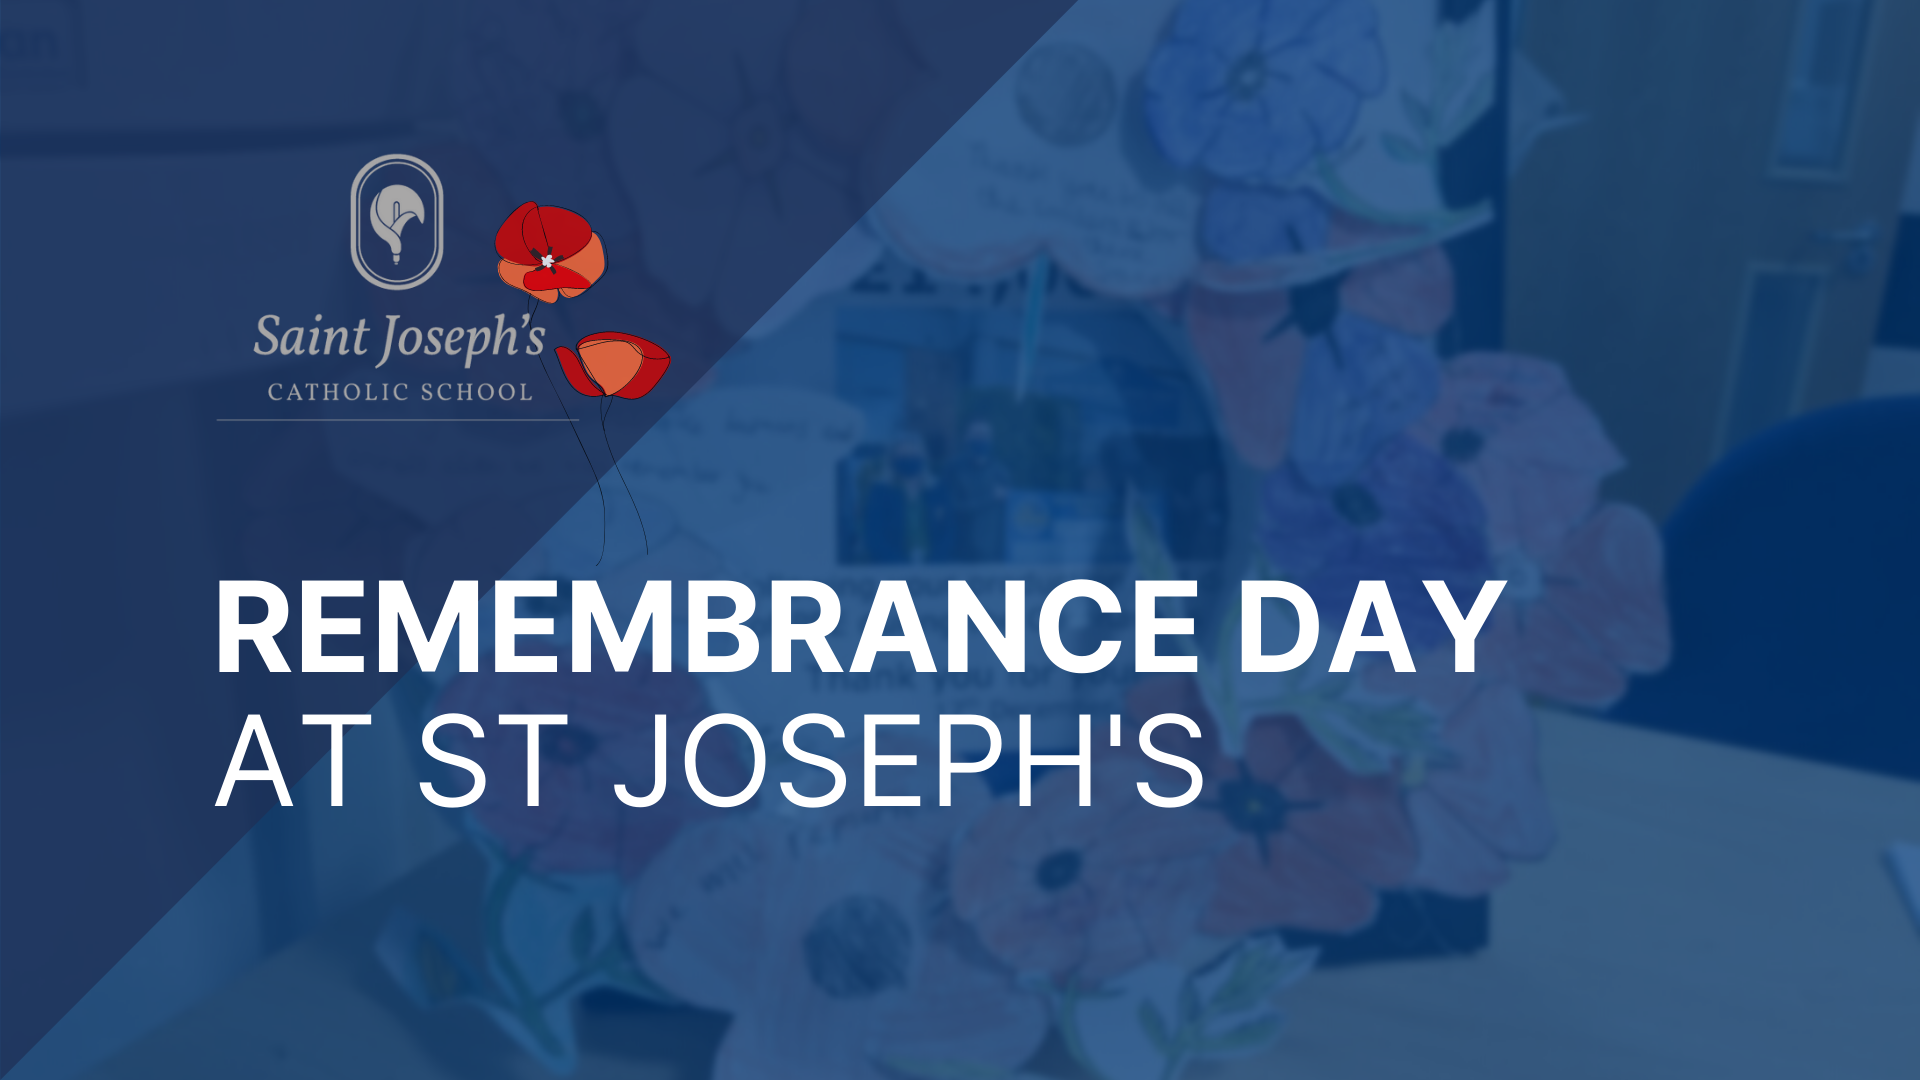 Featured image for “Remembrance Day at St Joseph’s”